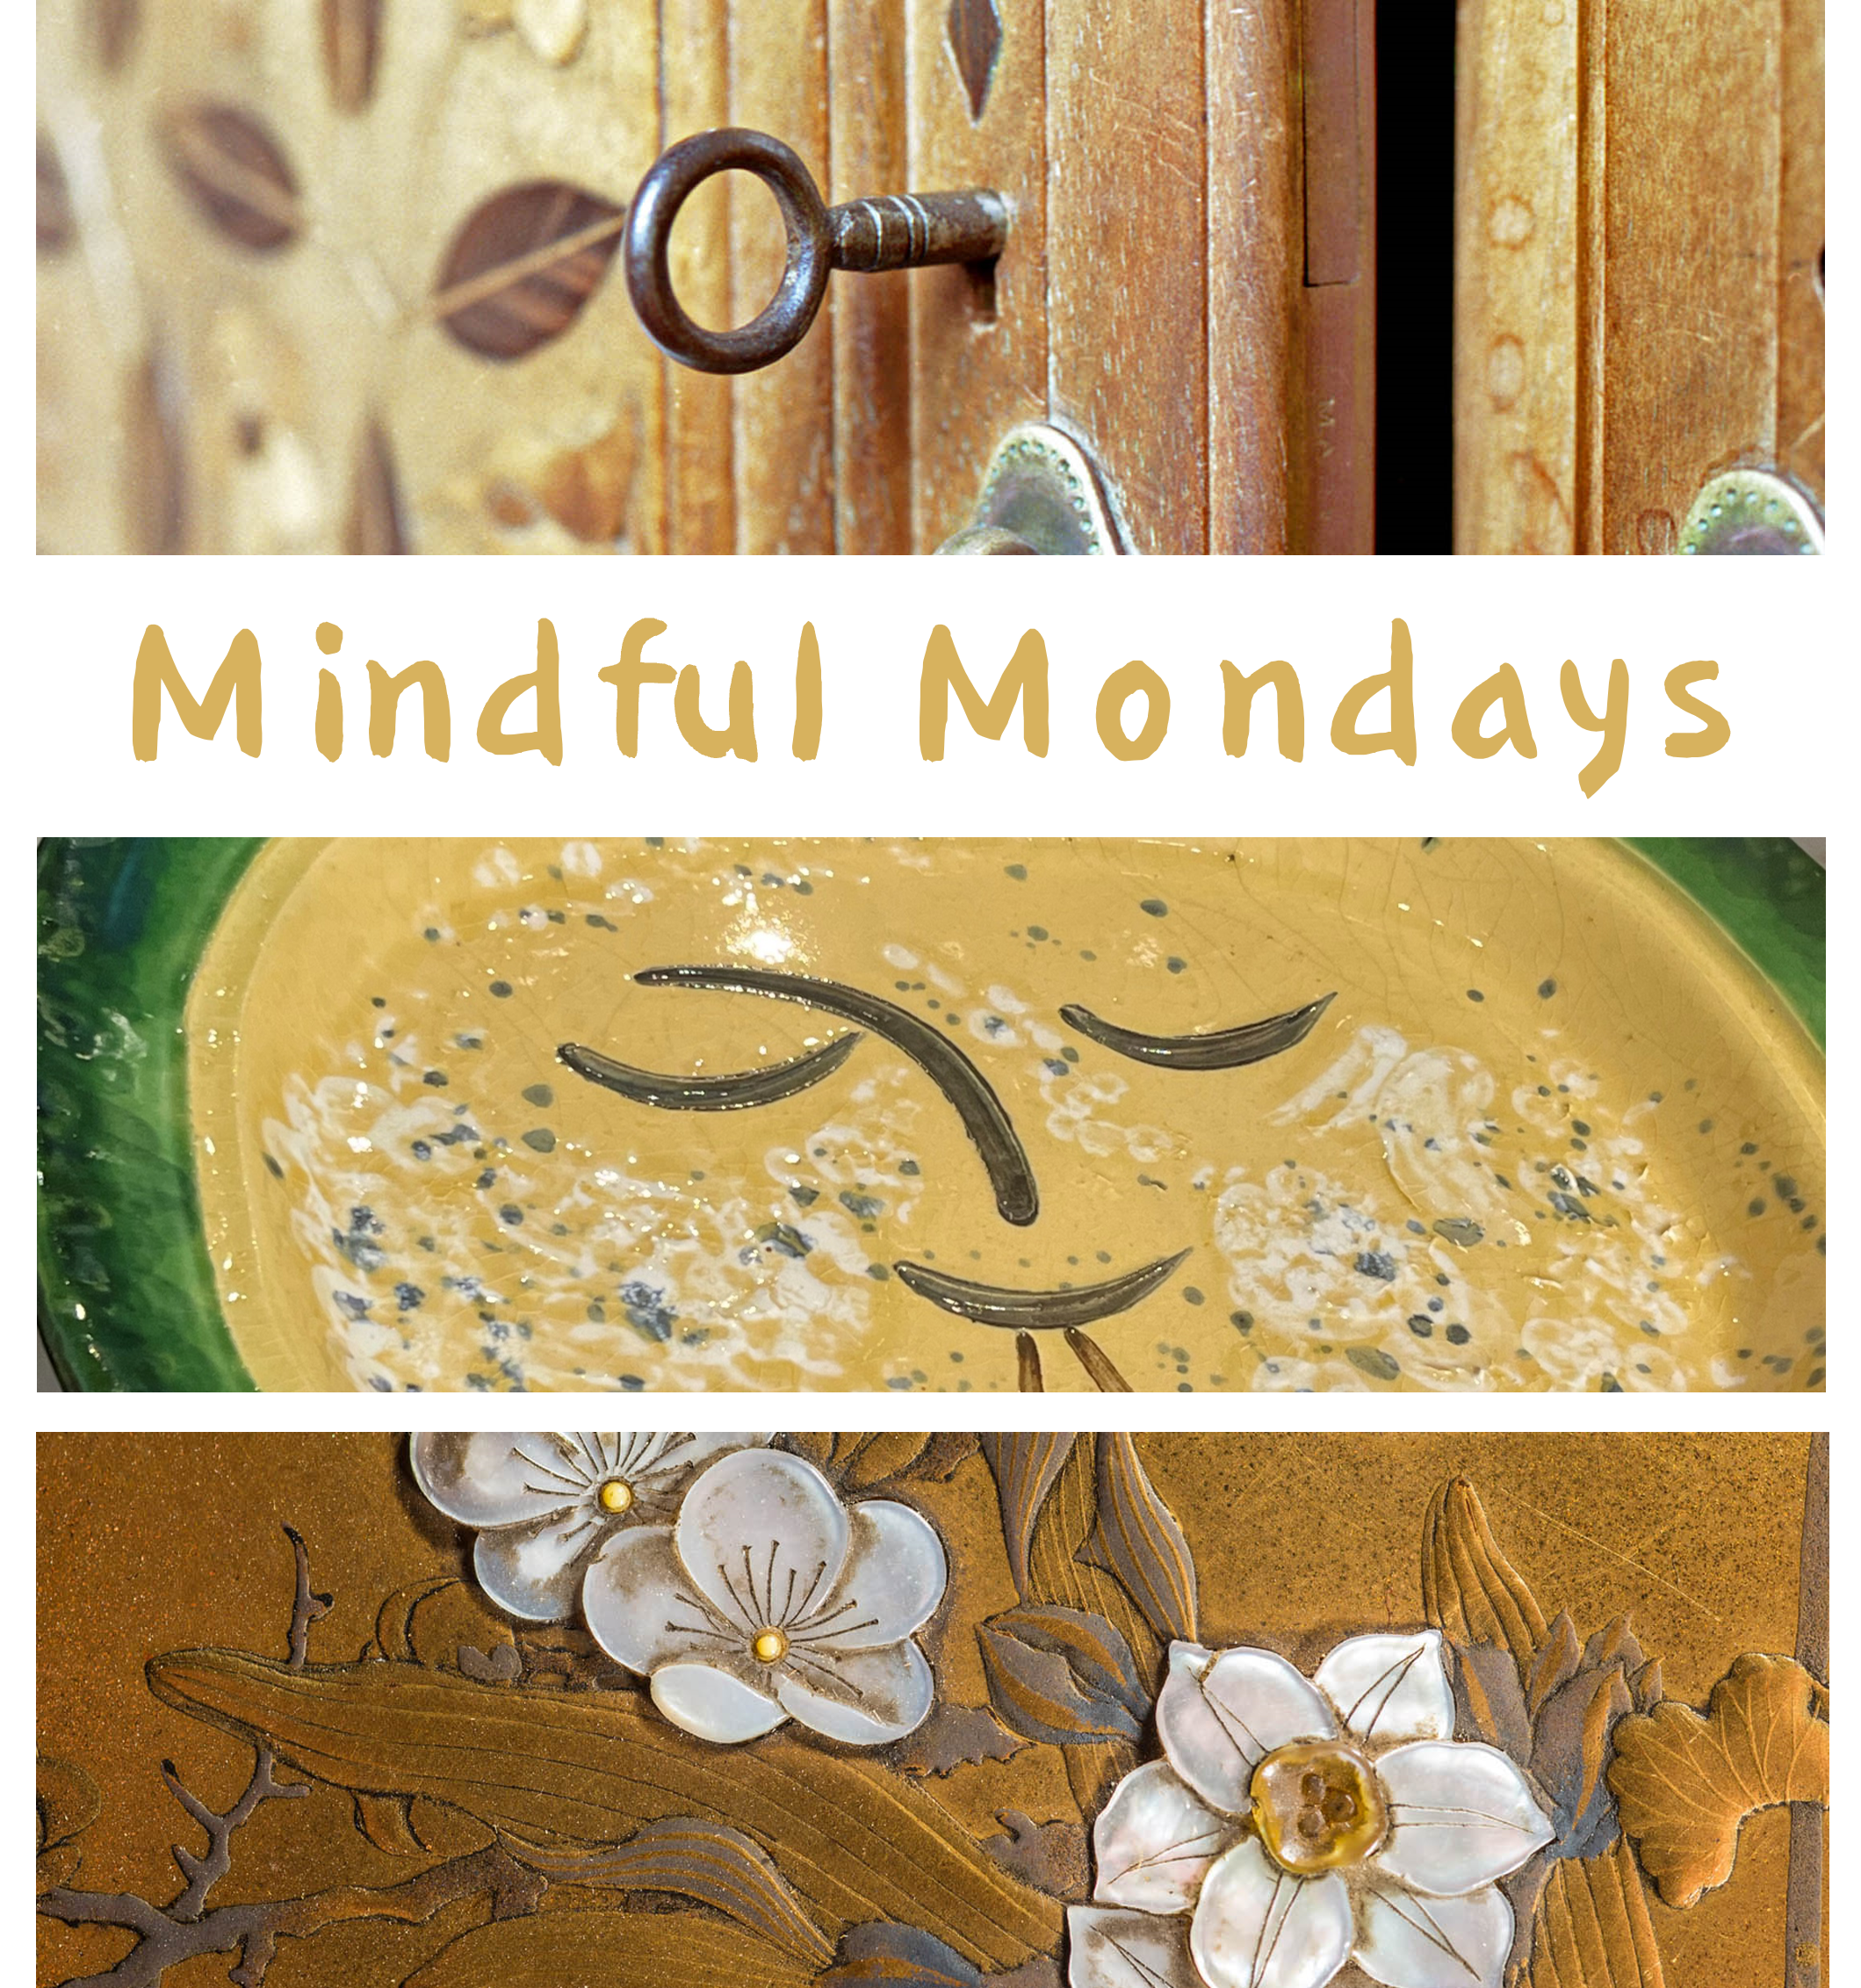 Mindful Mondays at the Museum